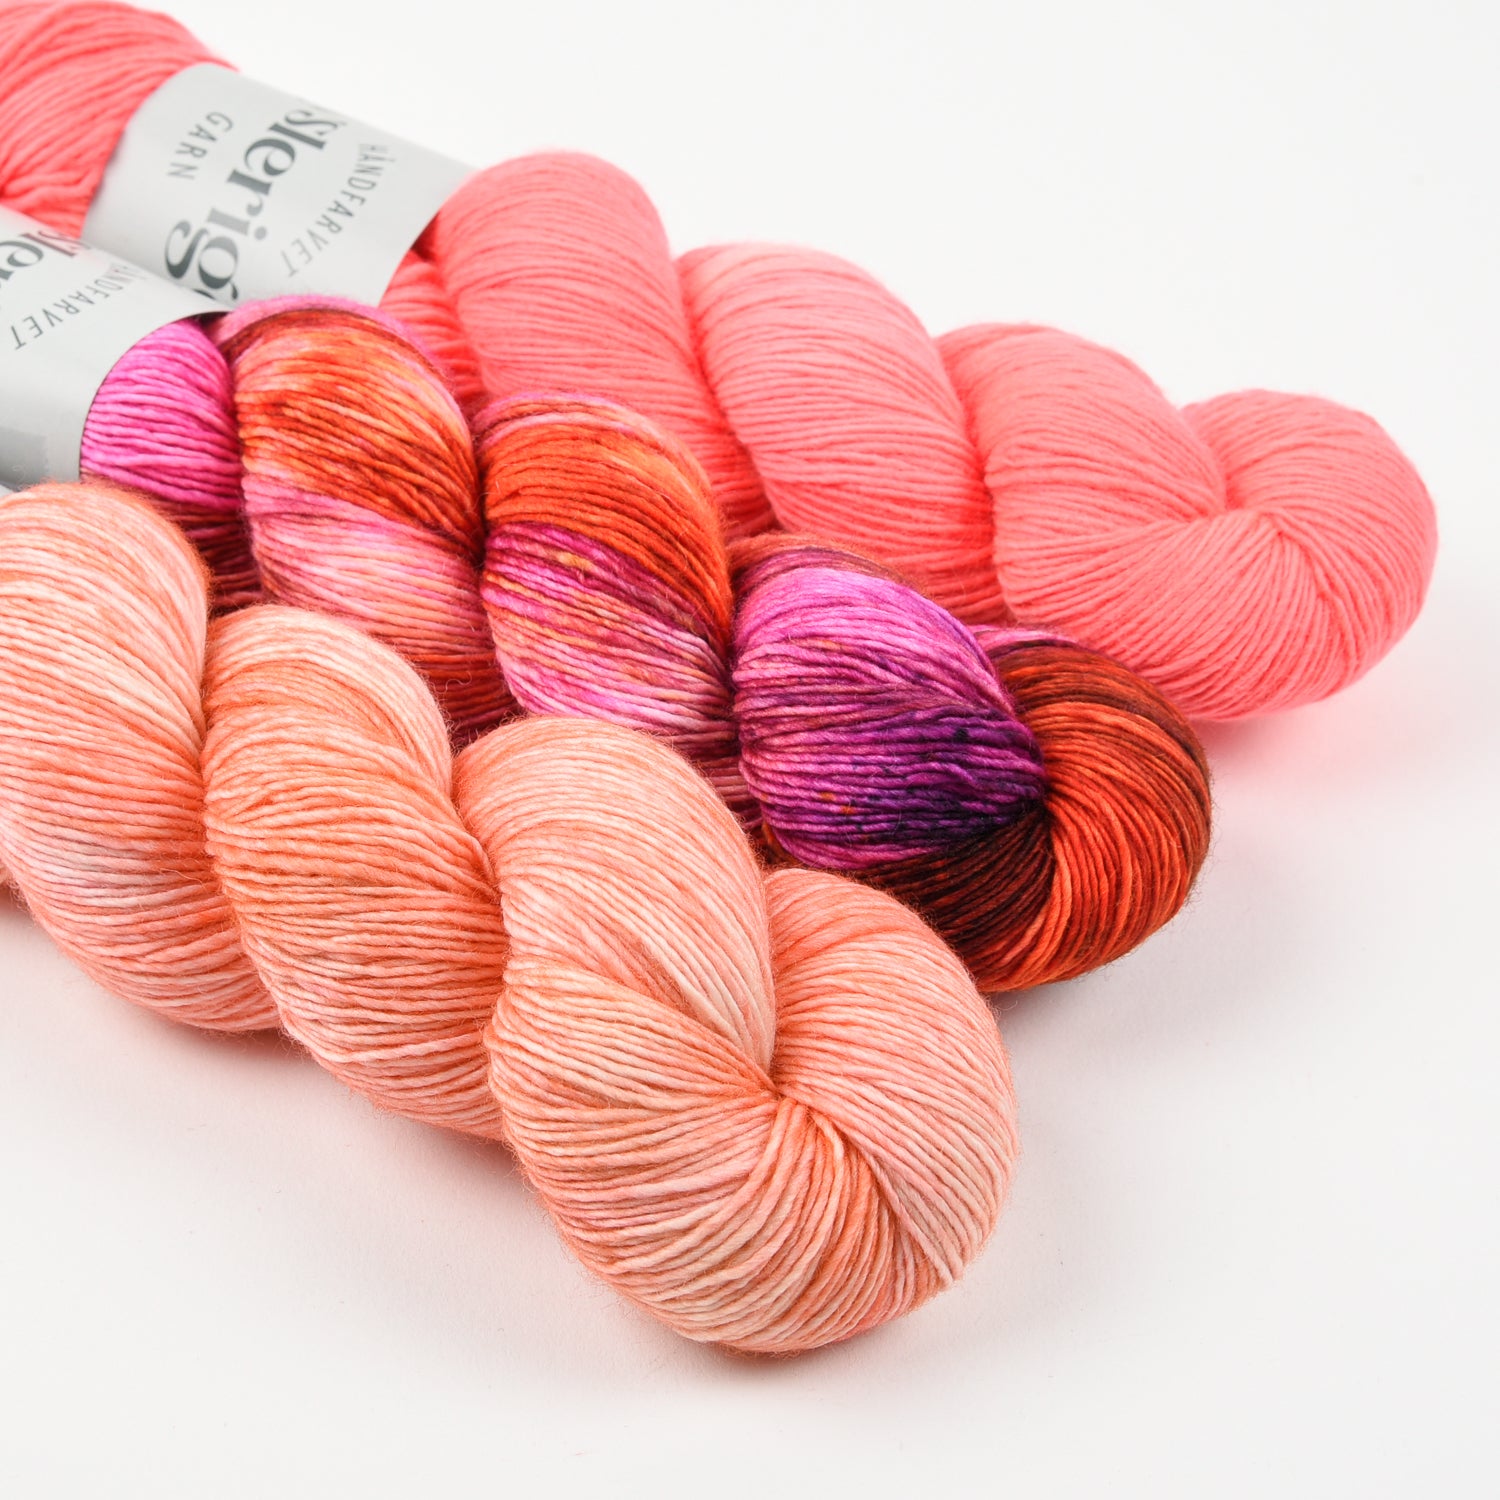 WESTKNITS KIT - CORAL PARTY